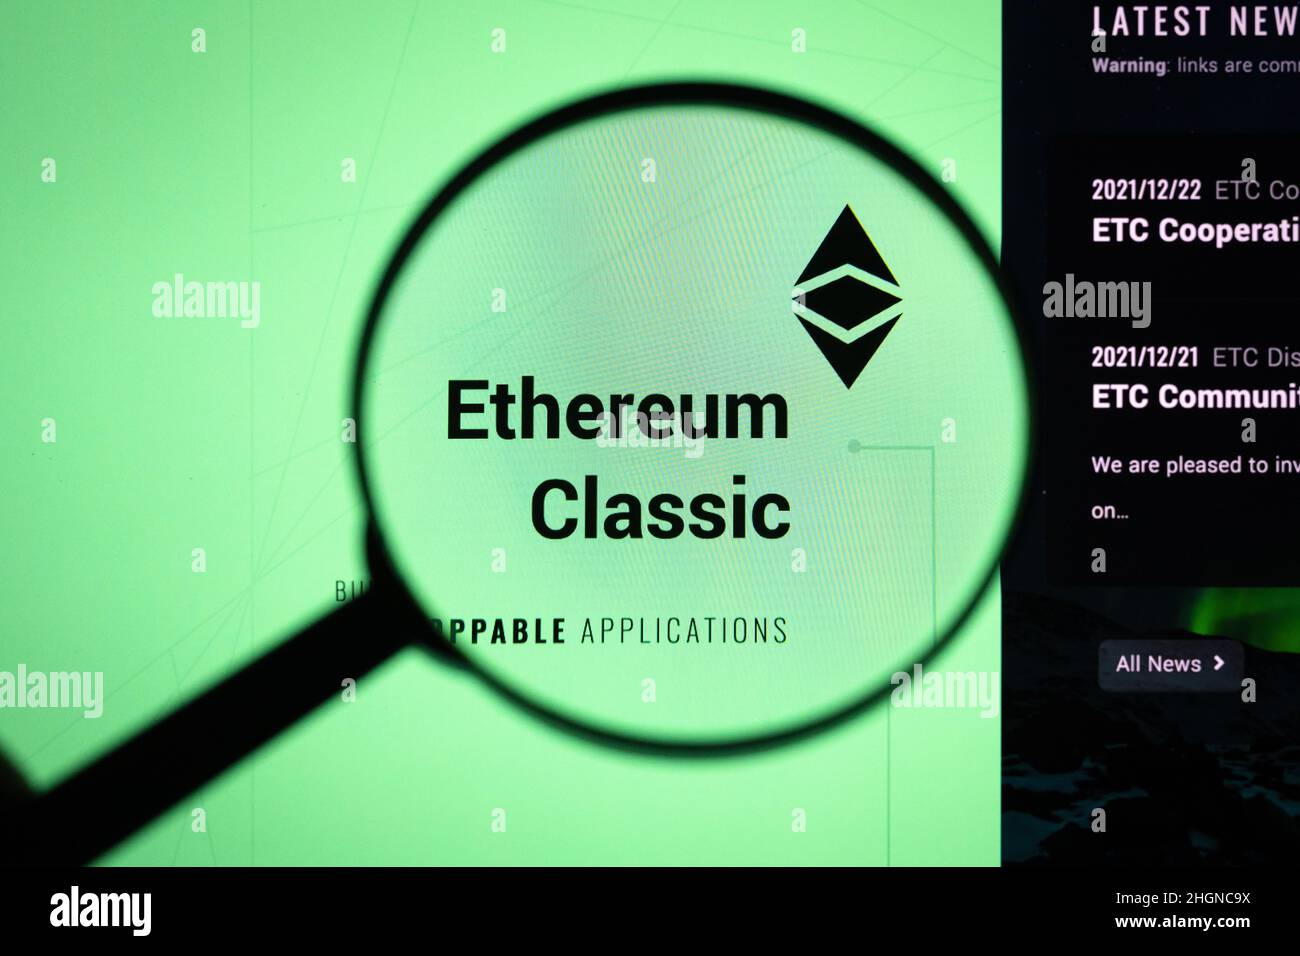 Ethereum Classic crypto company logo on a website, seen on a computer screen through a magnifying glass. Stock Photo